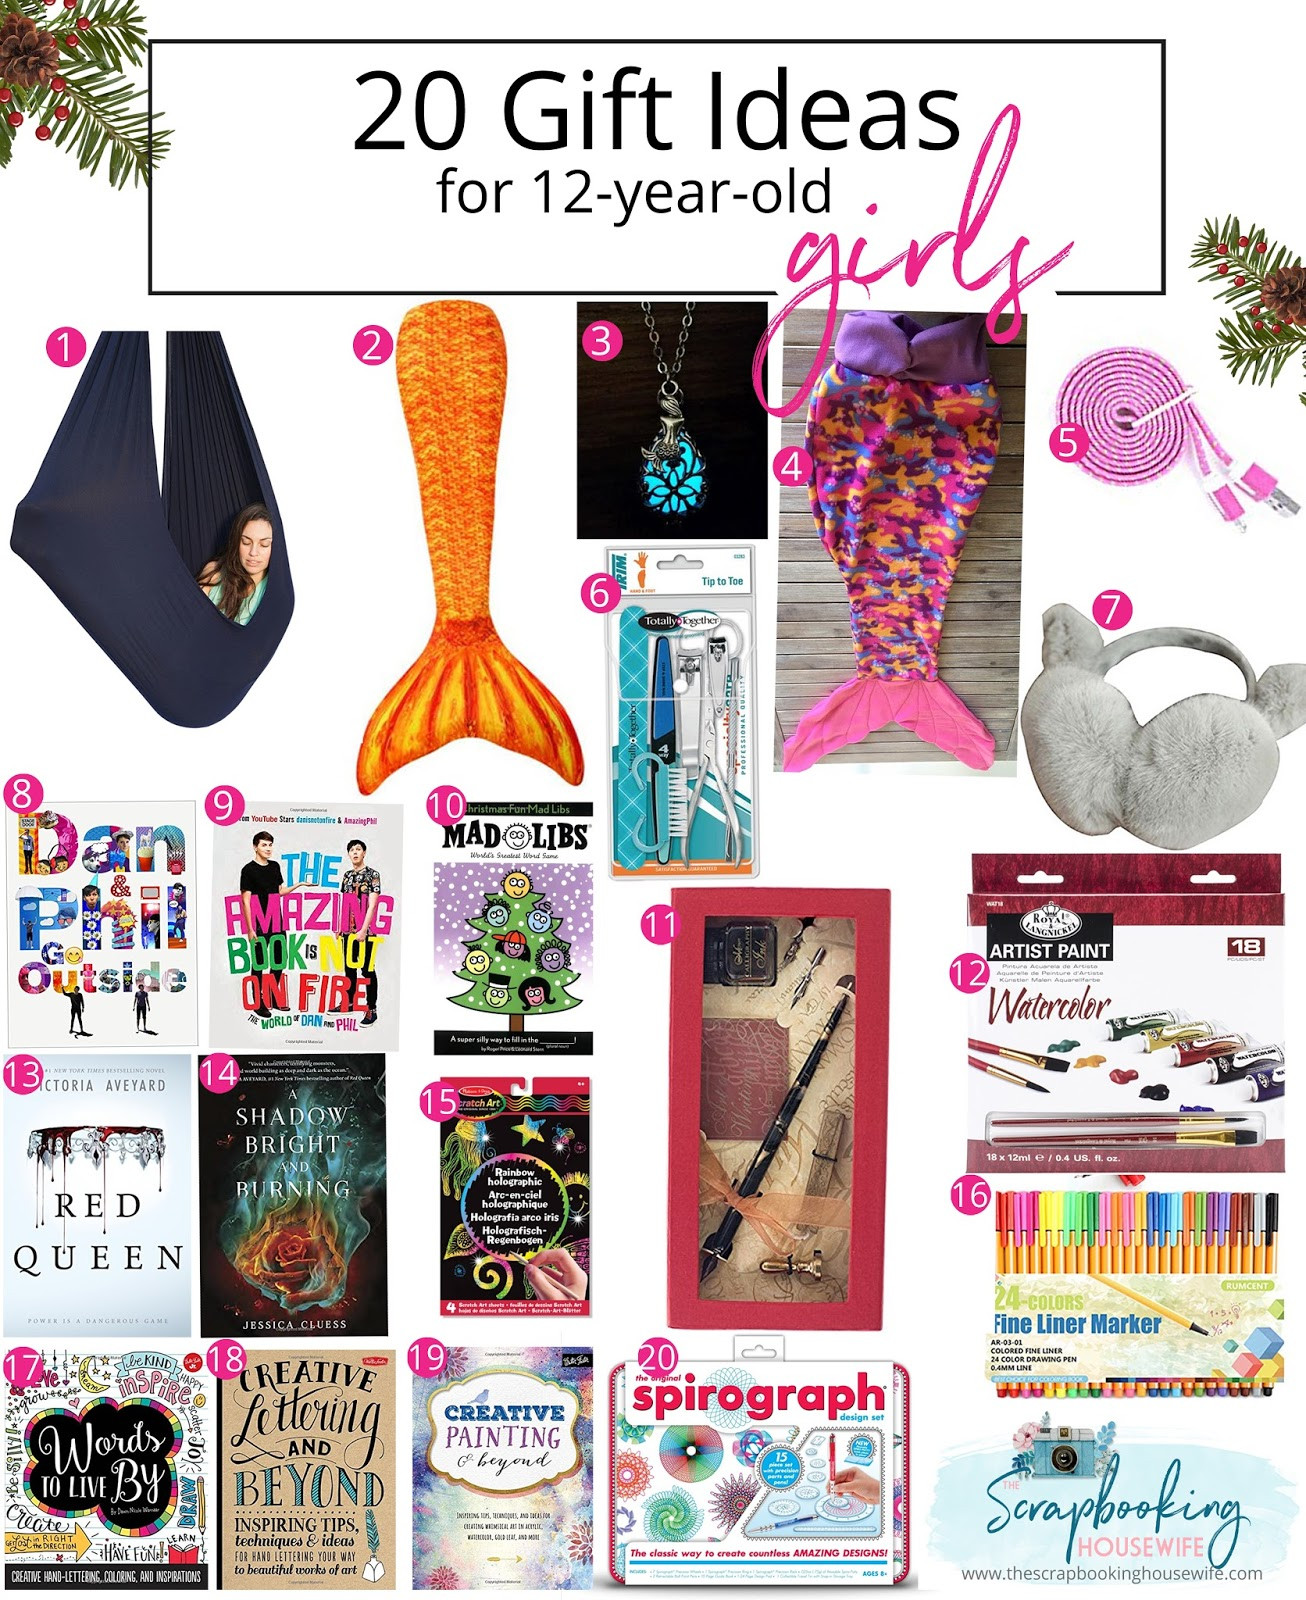 Gift Ideas 12 Year Old Girls
 Ellabella Designs 13 GIFT IDEAS FOR TODDLERS